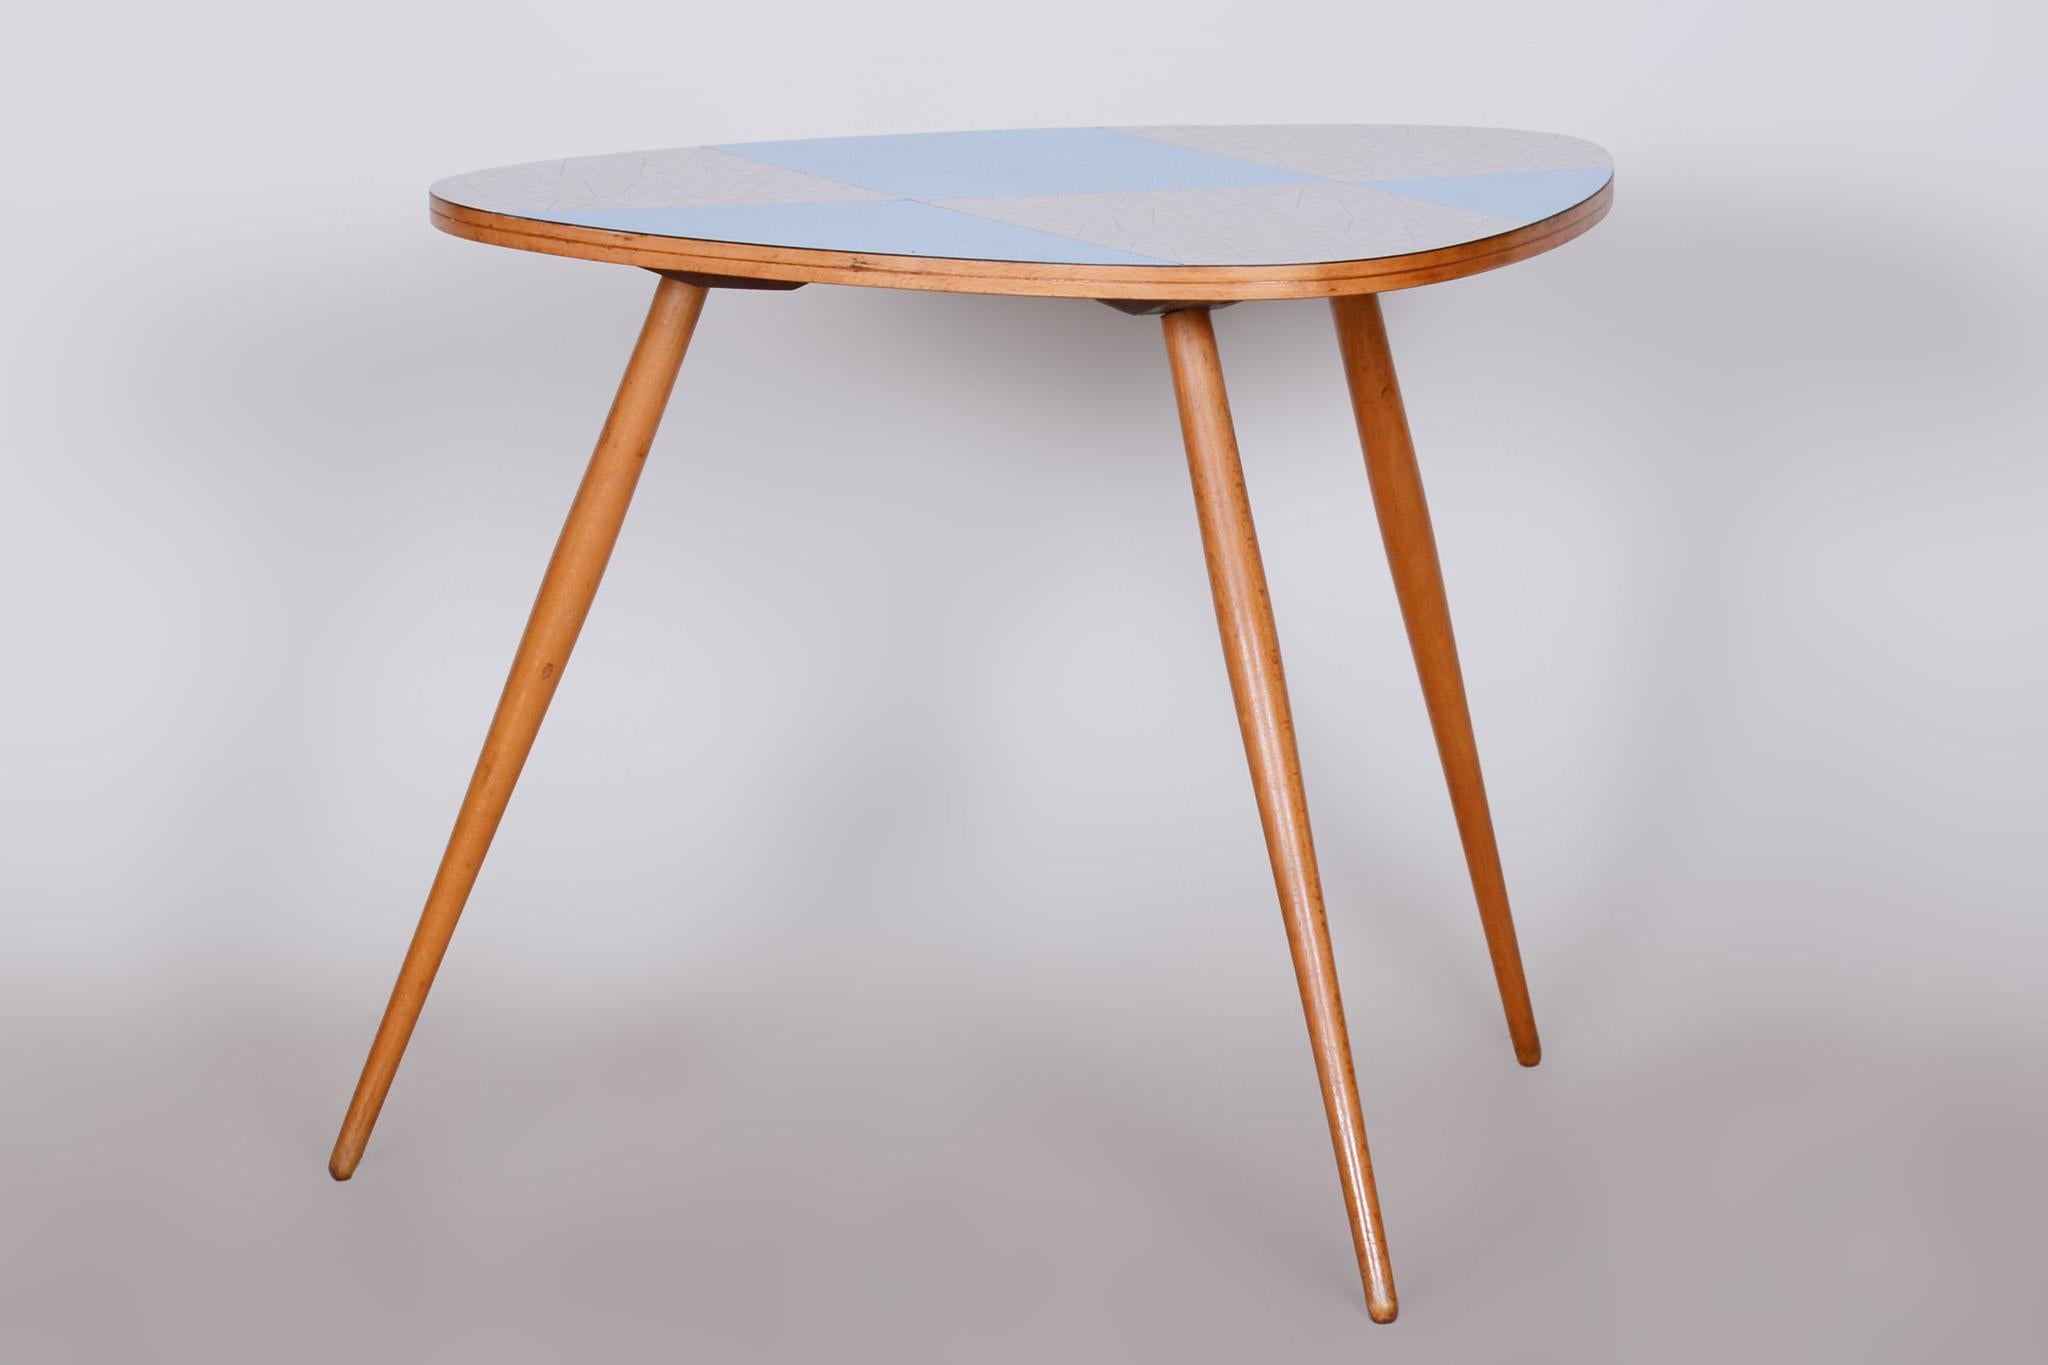 Small midcentury table.

Source: Czechia
Period: 1950-1959
Colors: Brown, blue, grey with a pattern
Material: Beech, umakart

Well-preserved condition.